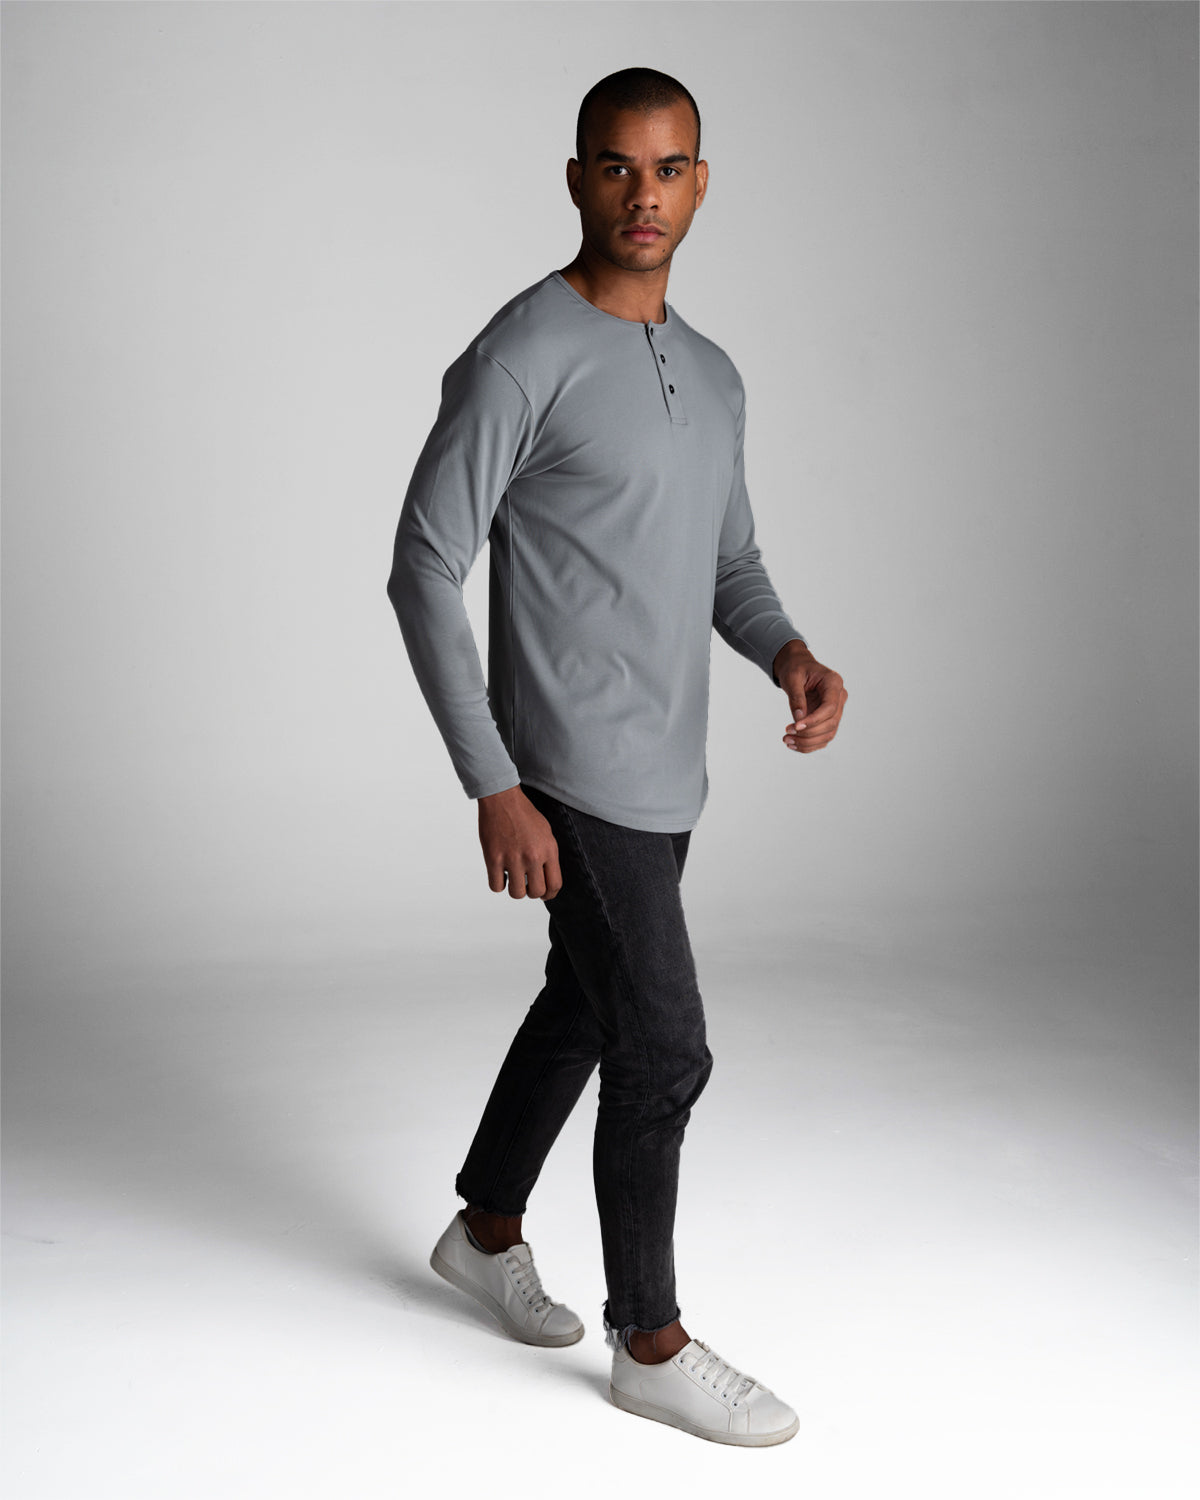 Long Sleeve Curved Henley T-Shirt: Space Gray